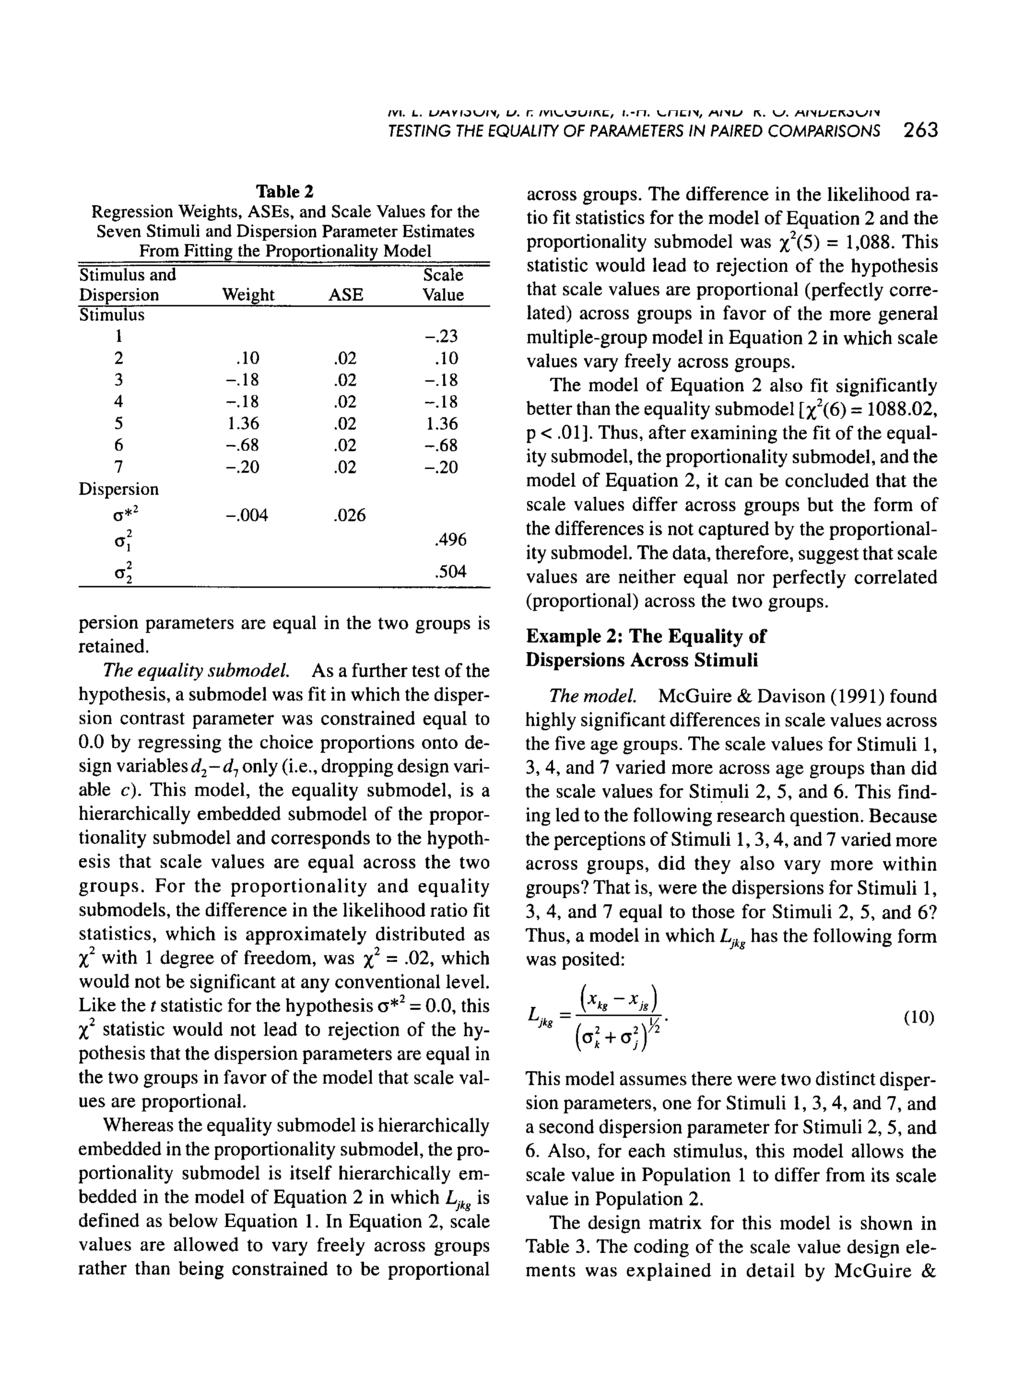 263 Table 2 Regression Weights, ASEs, and Scale Values for the Seven Stimuli and Dispersion Parameter Estimates From Fitting the Proportionality Model persion parameters are equal in the two groups